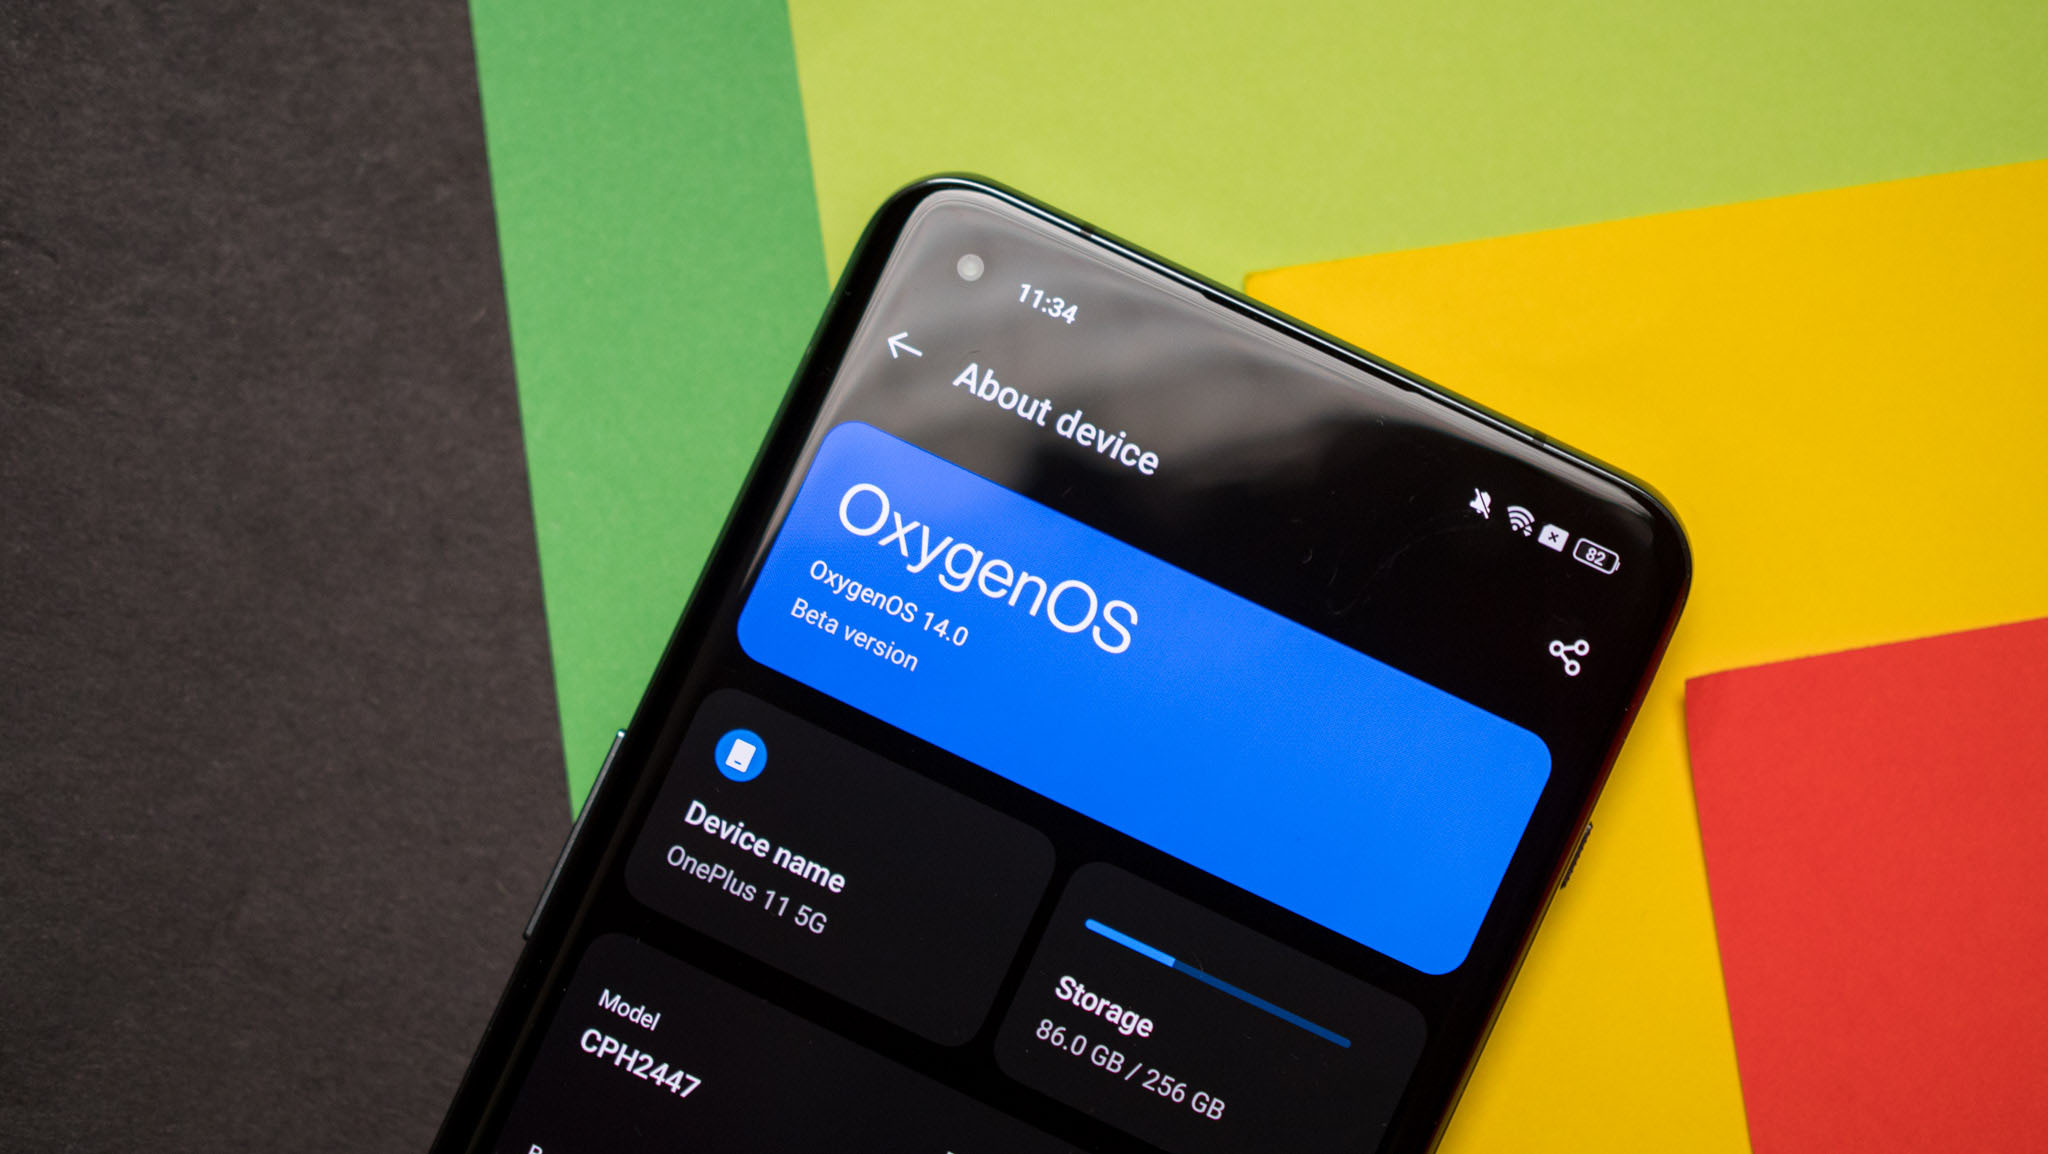 OxygenOS 14 about device page